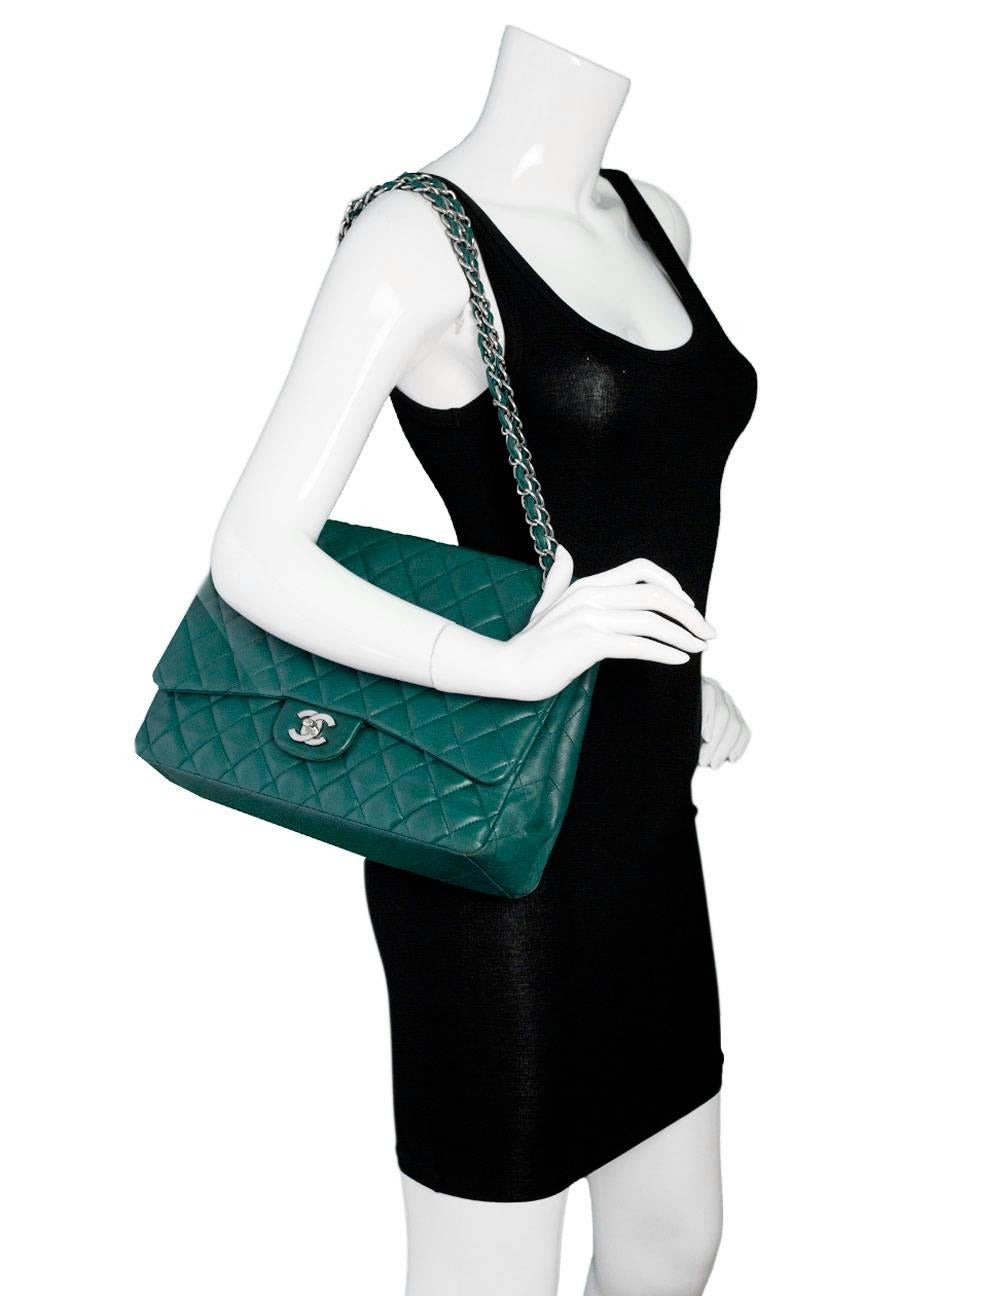 Chanel Teal Quilted Lambskin Single Flap Classic Maxi Bag
Features adjustable shoulder strap

Made In: France
Year of Production: 2009 -2010
Color: Teal
Hardware: Silvertone
Materials: Lambskin leather
Lining: Teal leather
Closure/Opening: Flap top